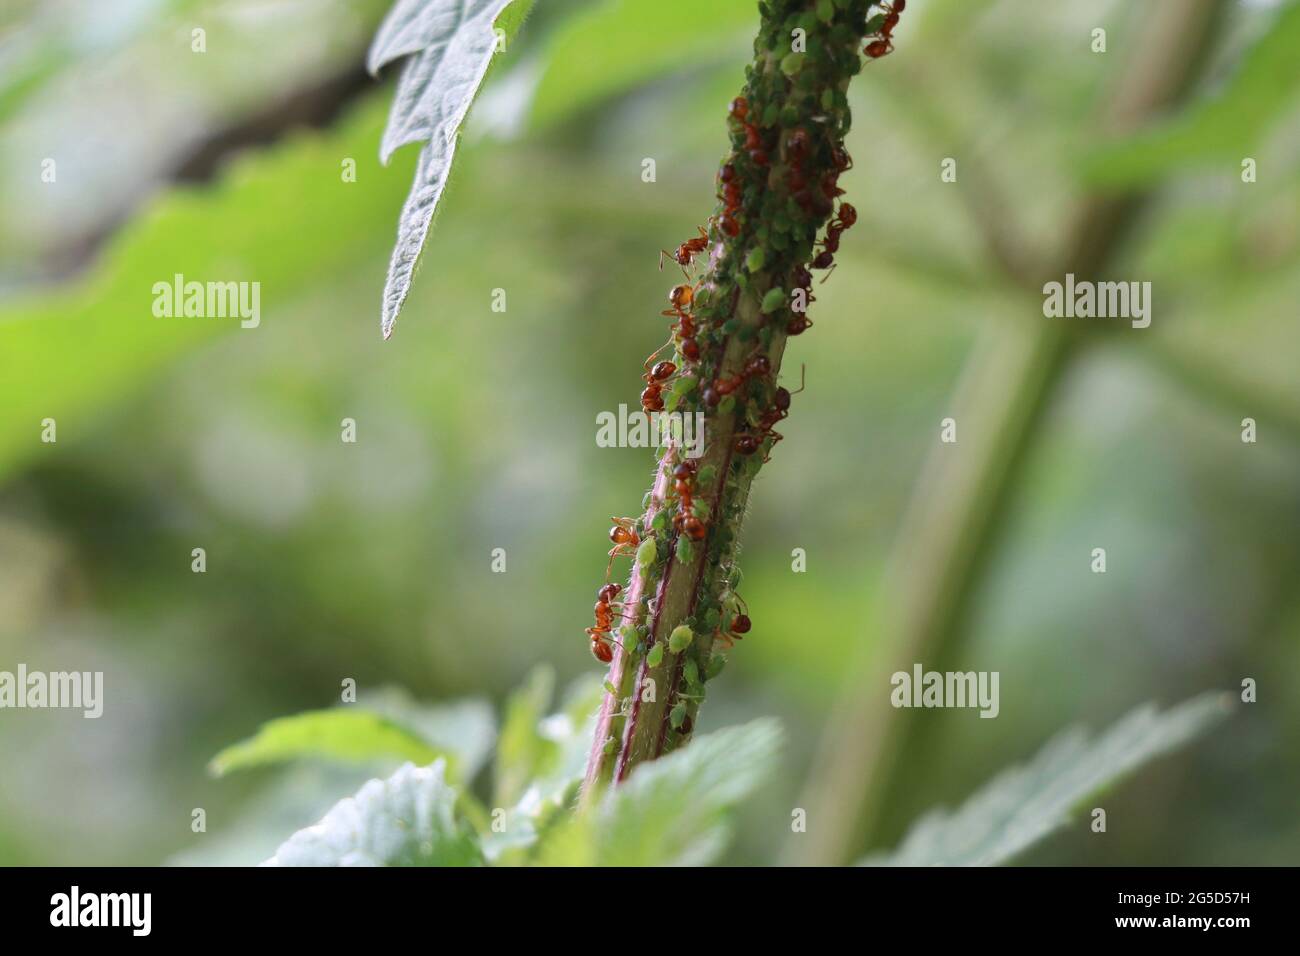 red farming ants milking green aphids on a nettle stem Stock Photo